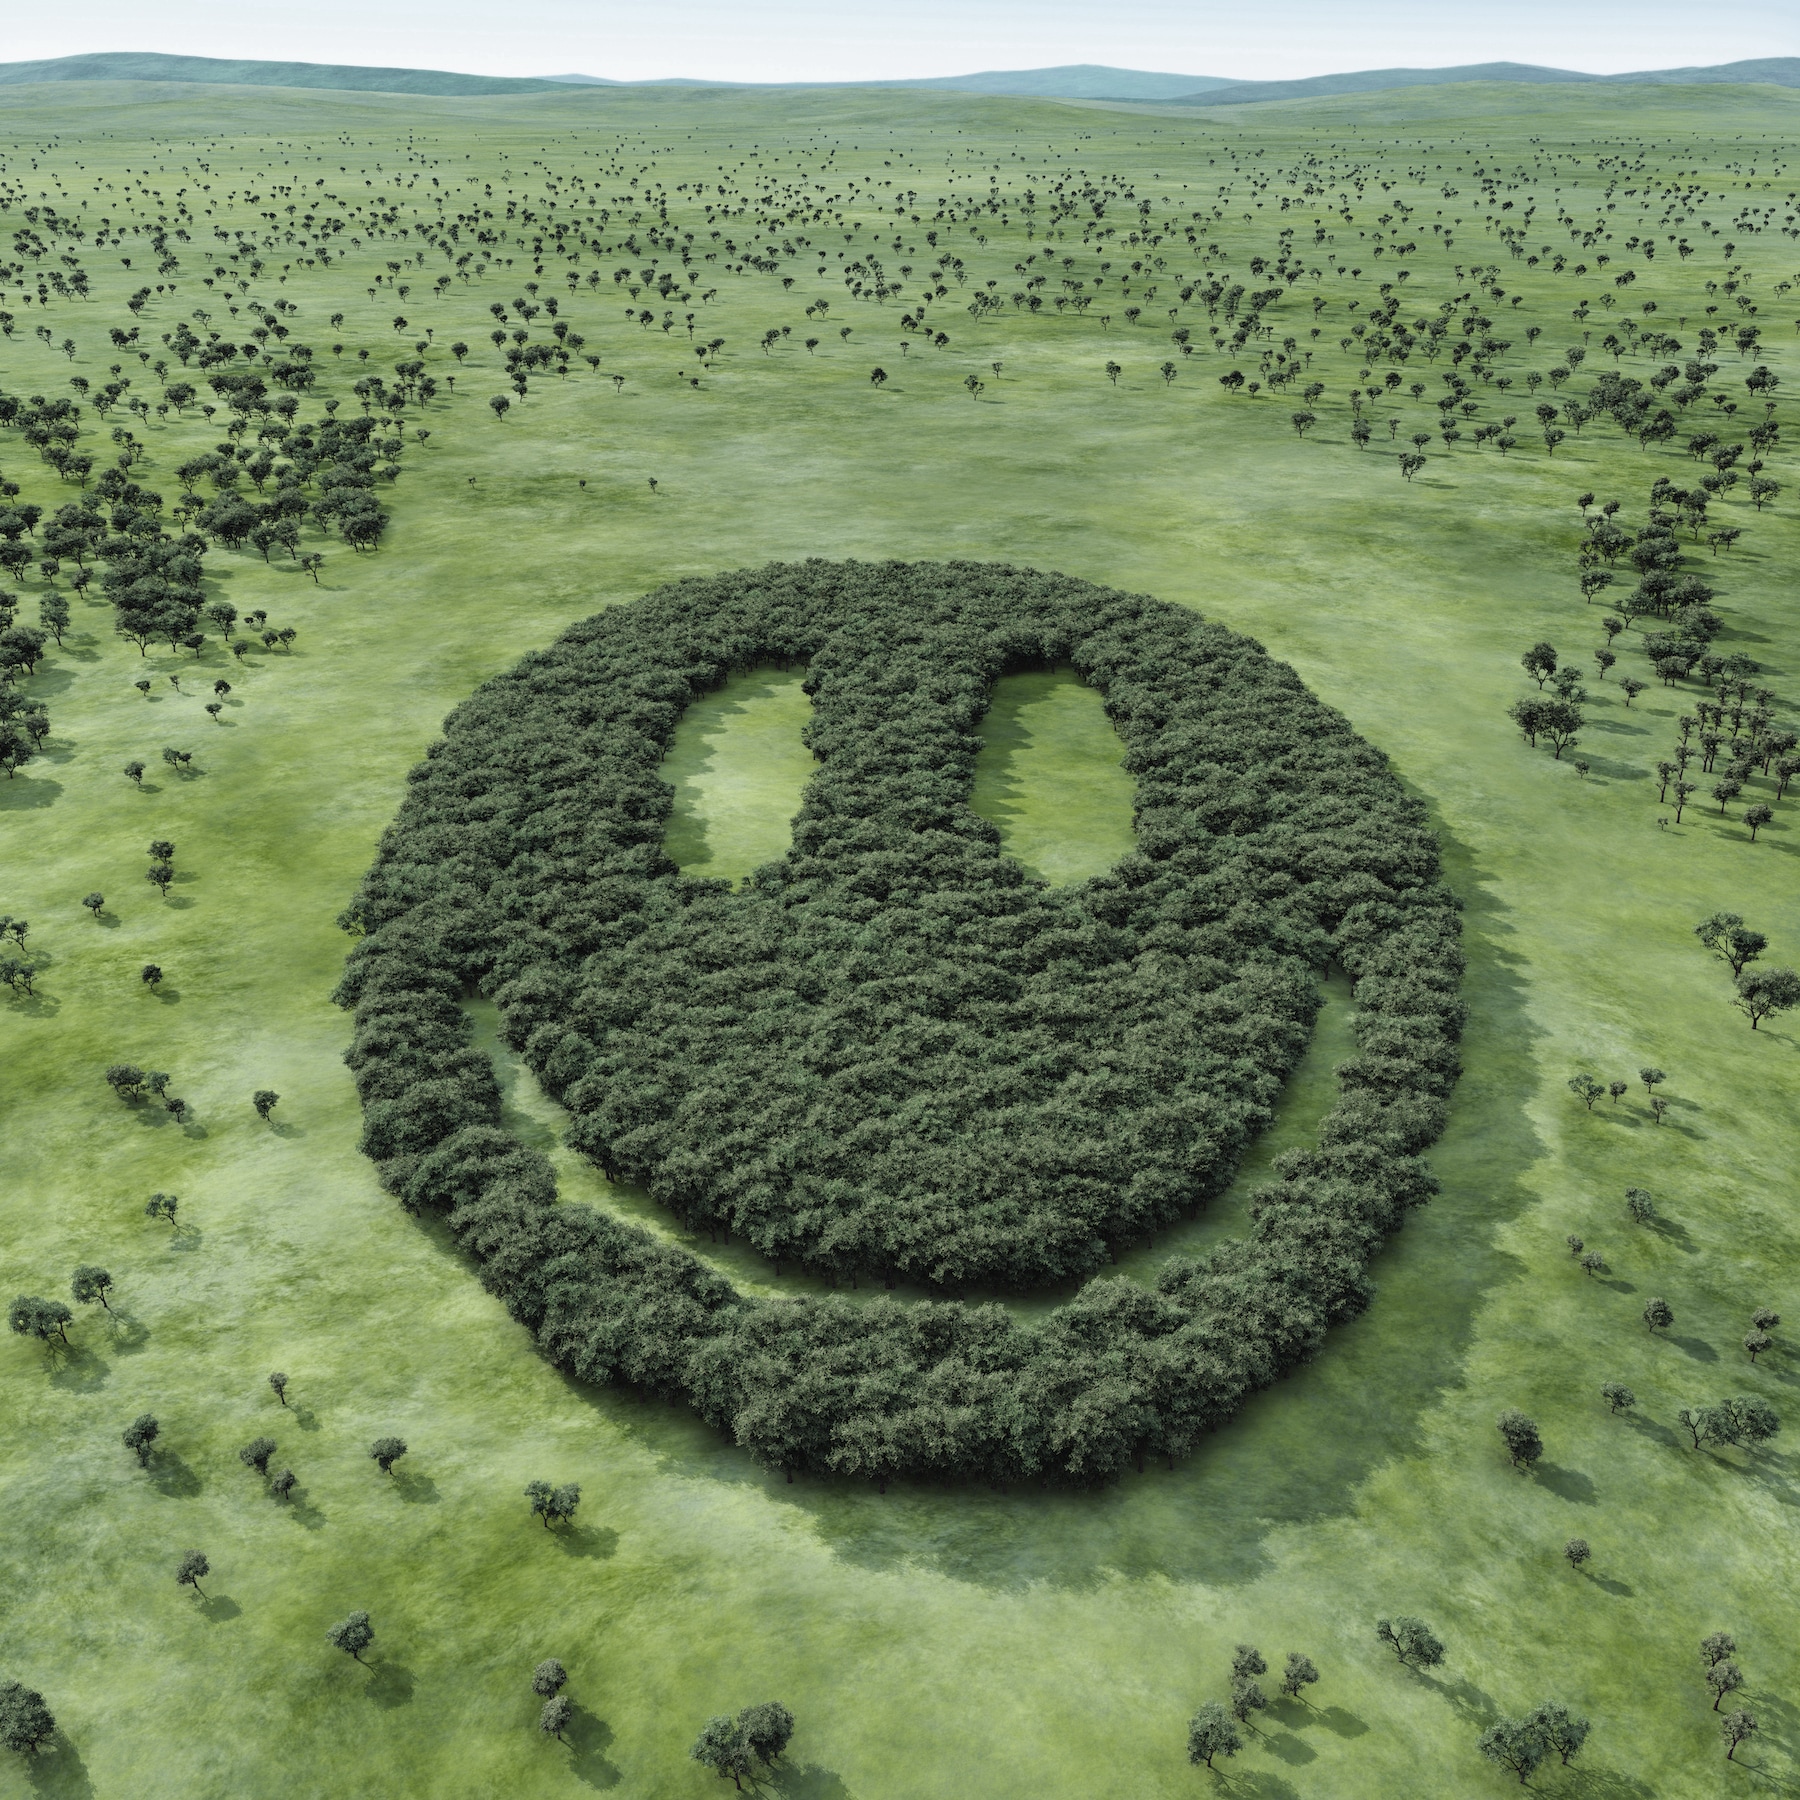 smiley face made of trees